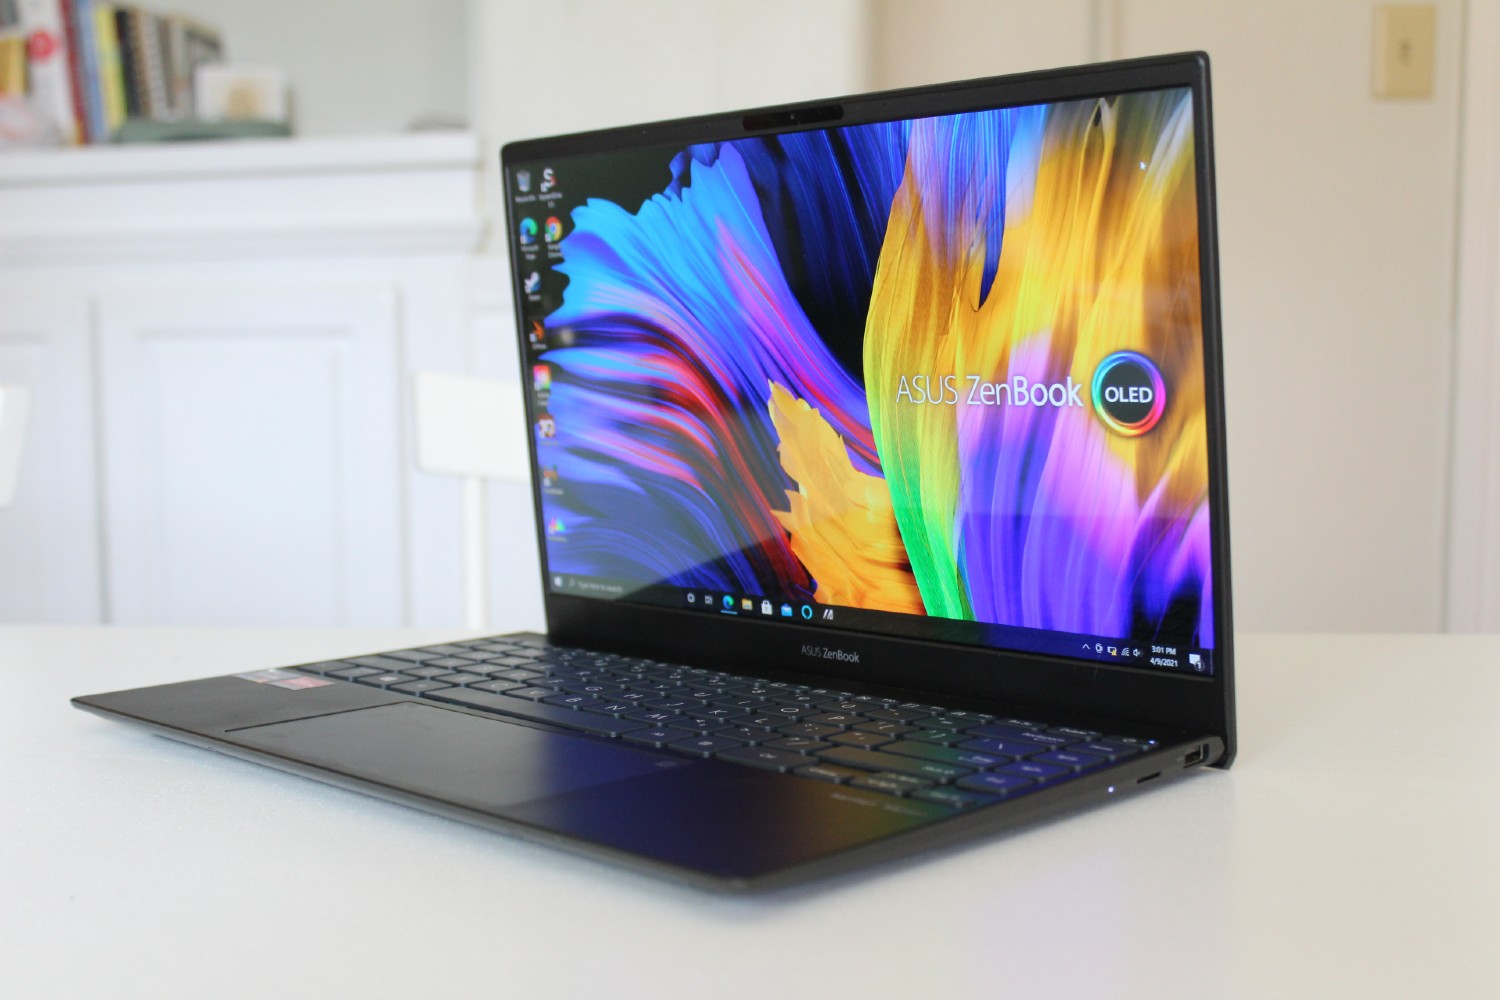 ASUS ZenBook 13 OLED (UX325): Not your ordinary Ultrabook! 